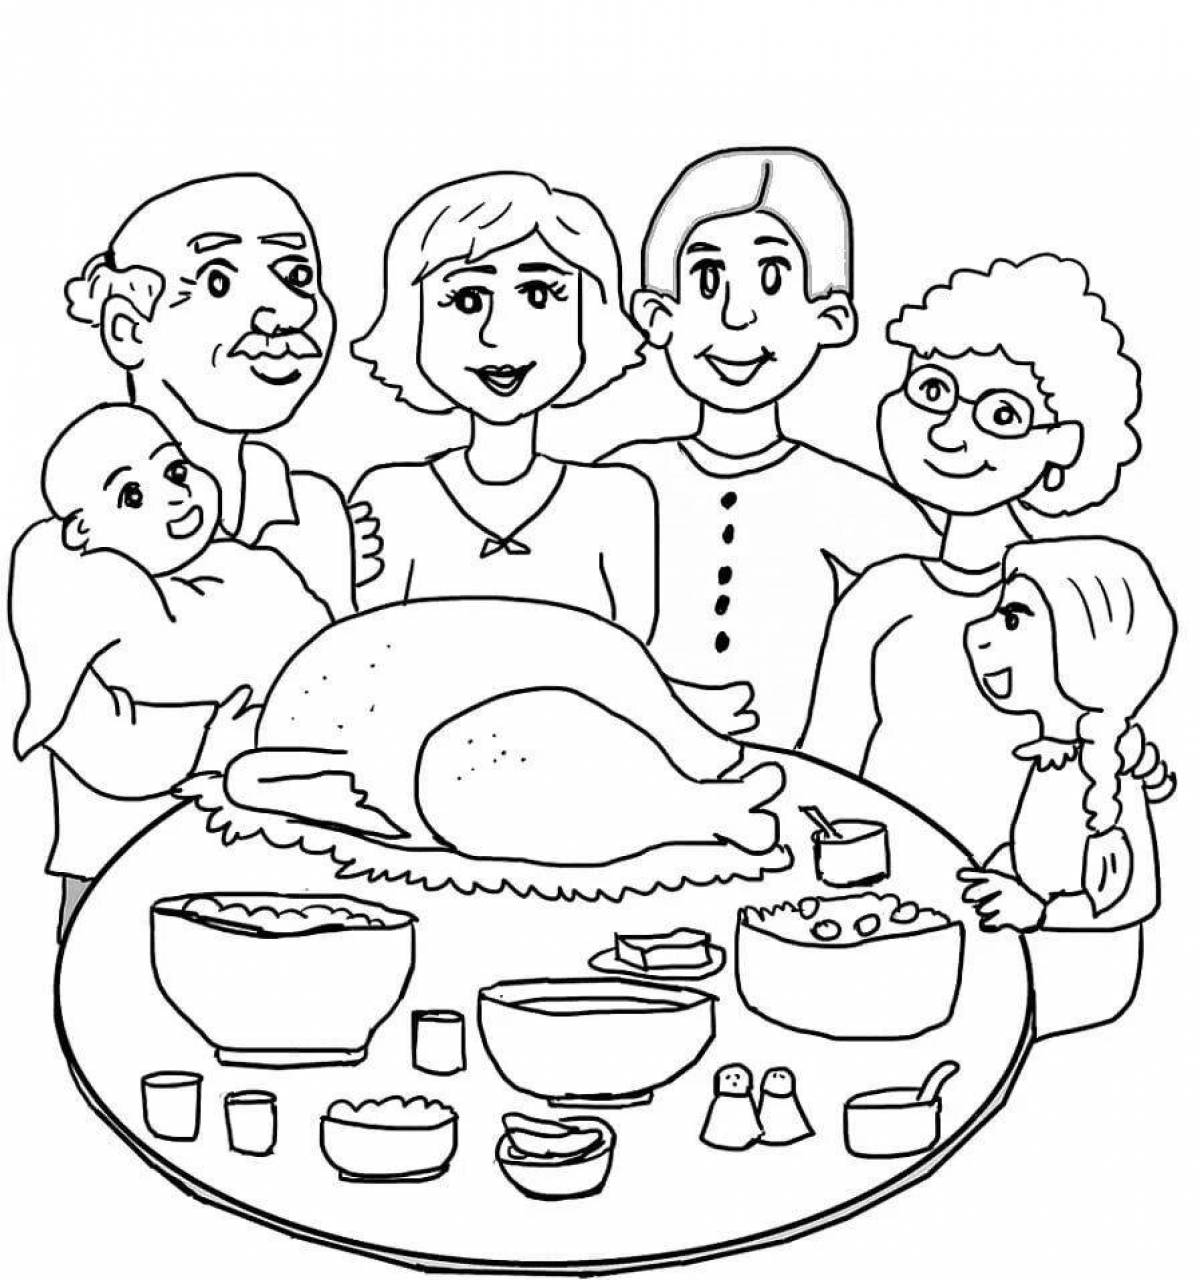 Coloring book exalted family traditions